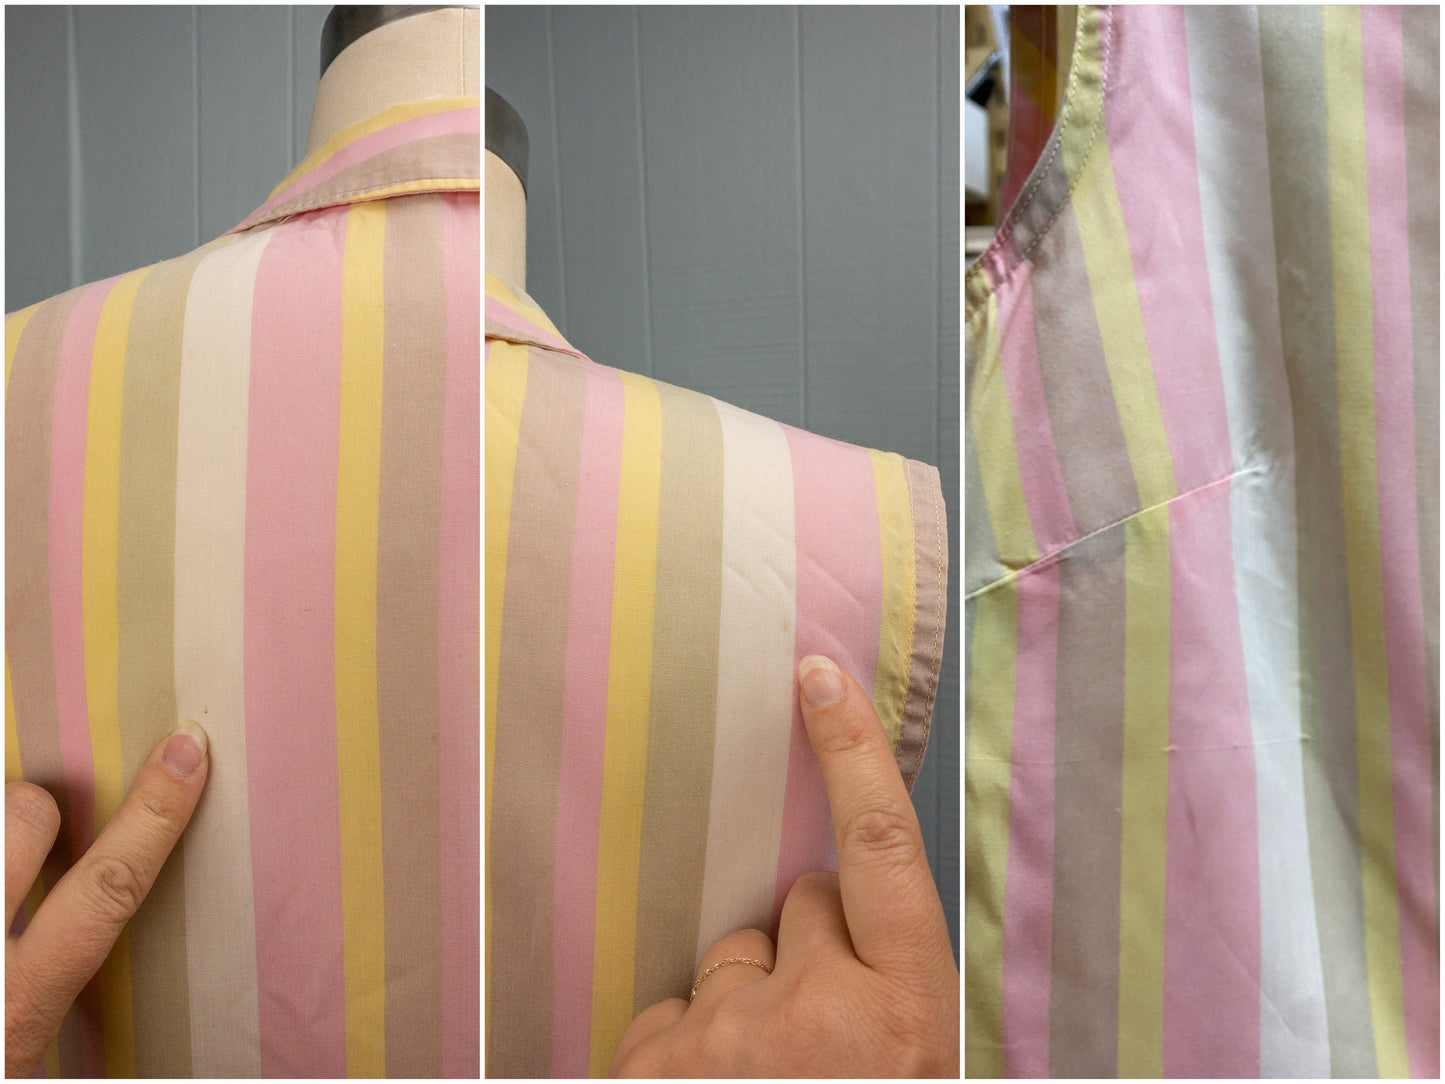 50's 60's Pale Striped Sleeveless Blouse | S/M